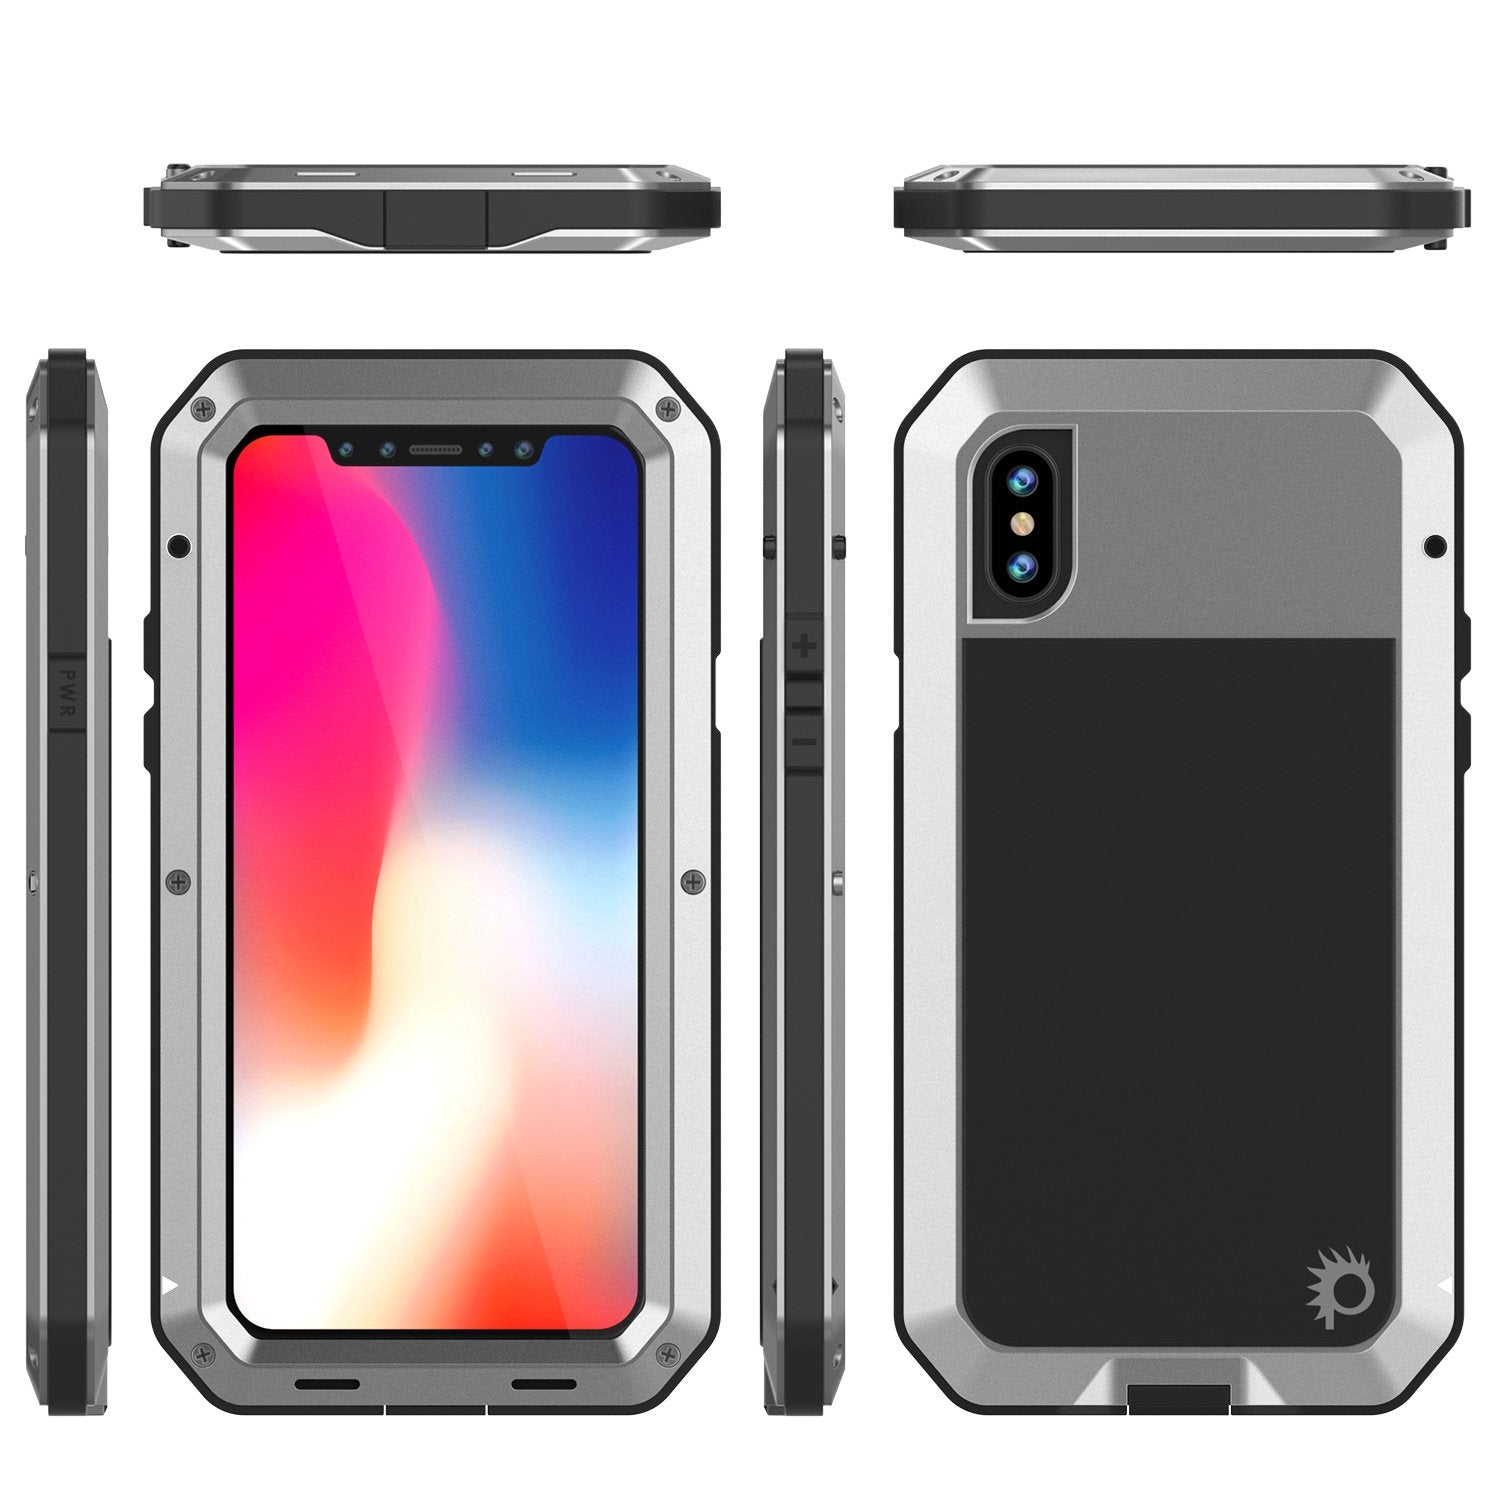 iPhone X Metal Case, Heavy Duty Military Grade Rugged Armor Cover [shock proof] Hybrid Full Body Hard Aluminum & TPU Design [non slip] W/ Prime Drop Protection for Apple iPhone 10 [Silver]